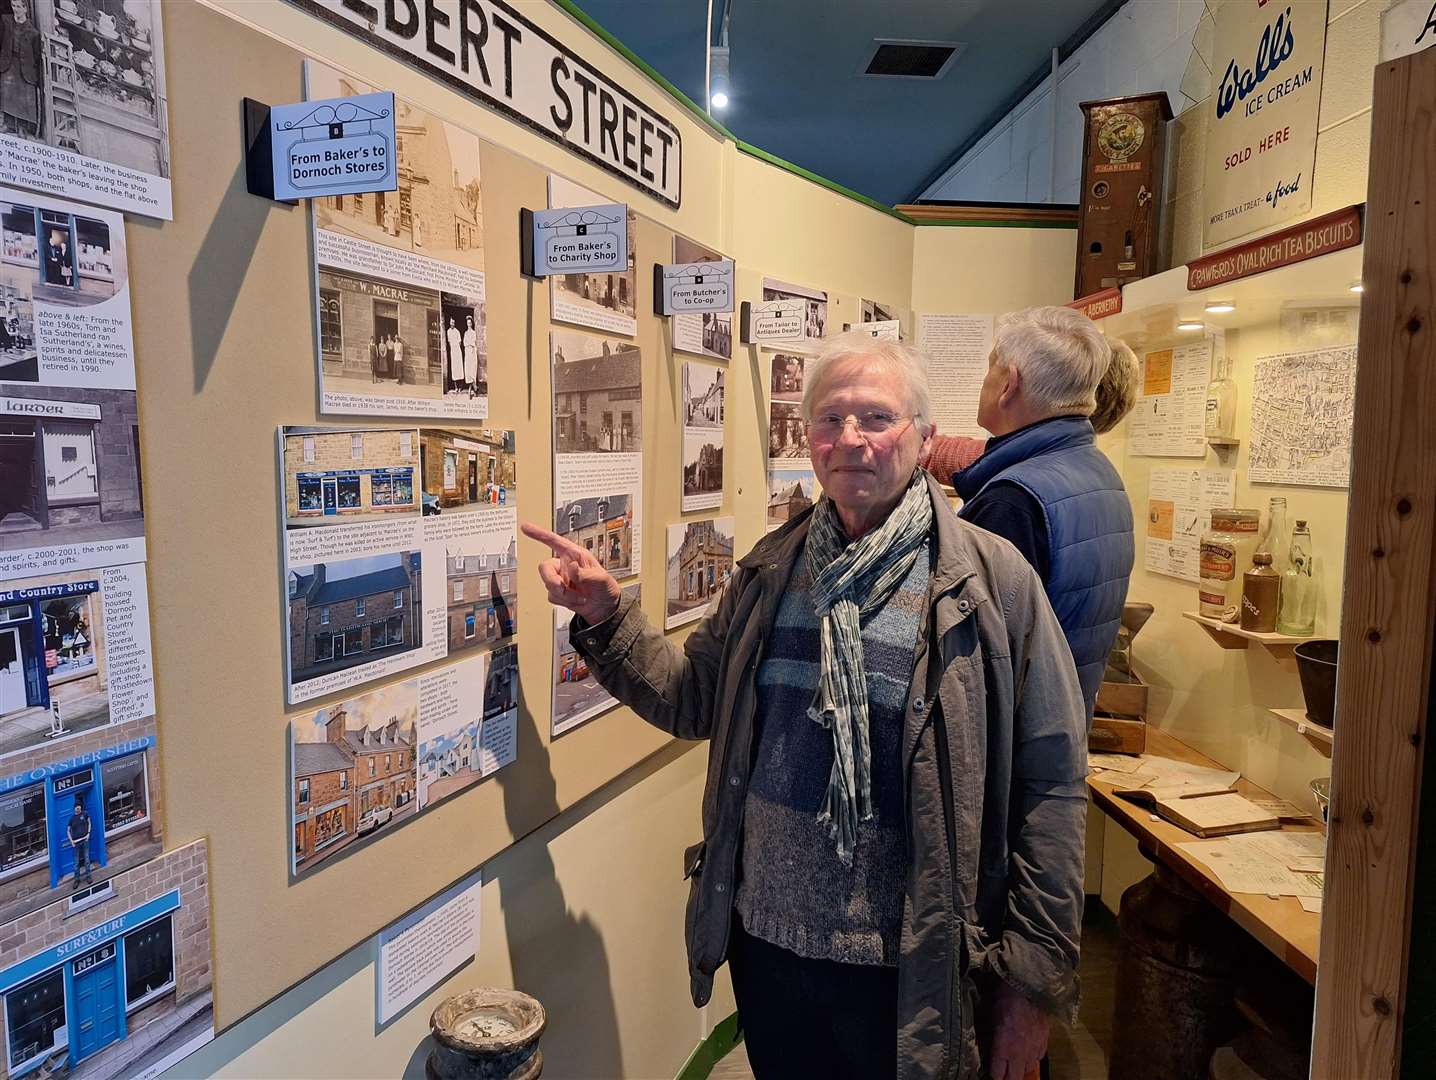 Dornoch Heritage Society chairman Peter Wild at the shop exhibition.